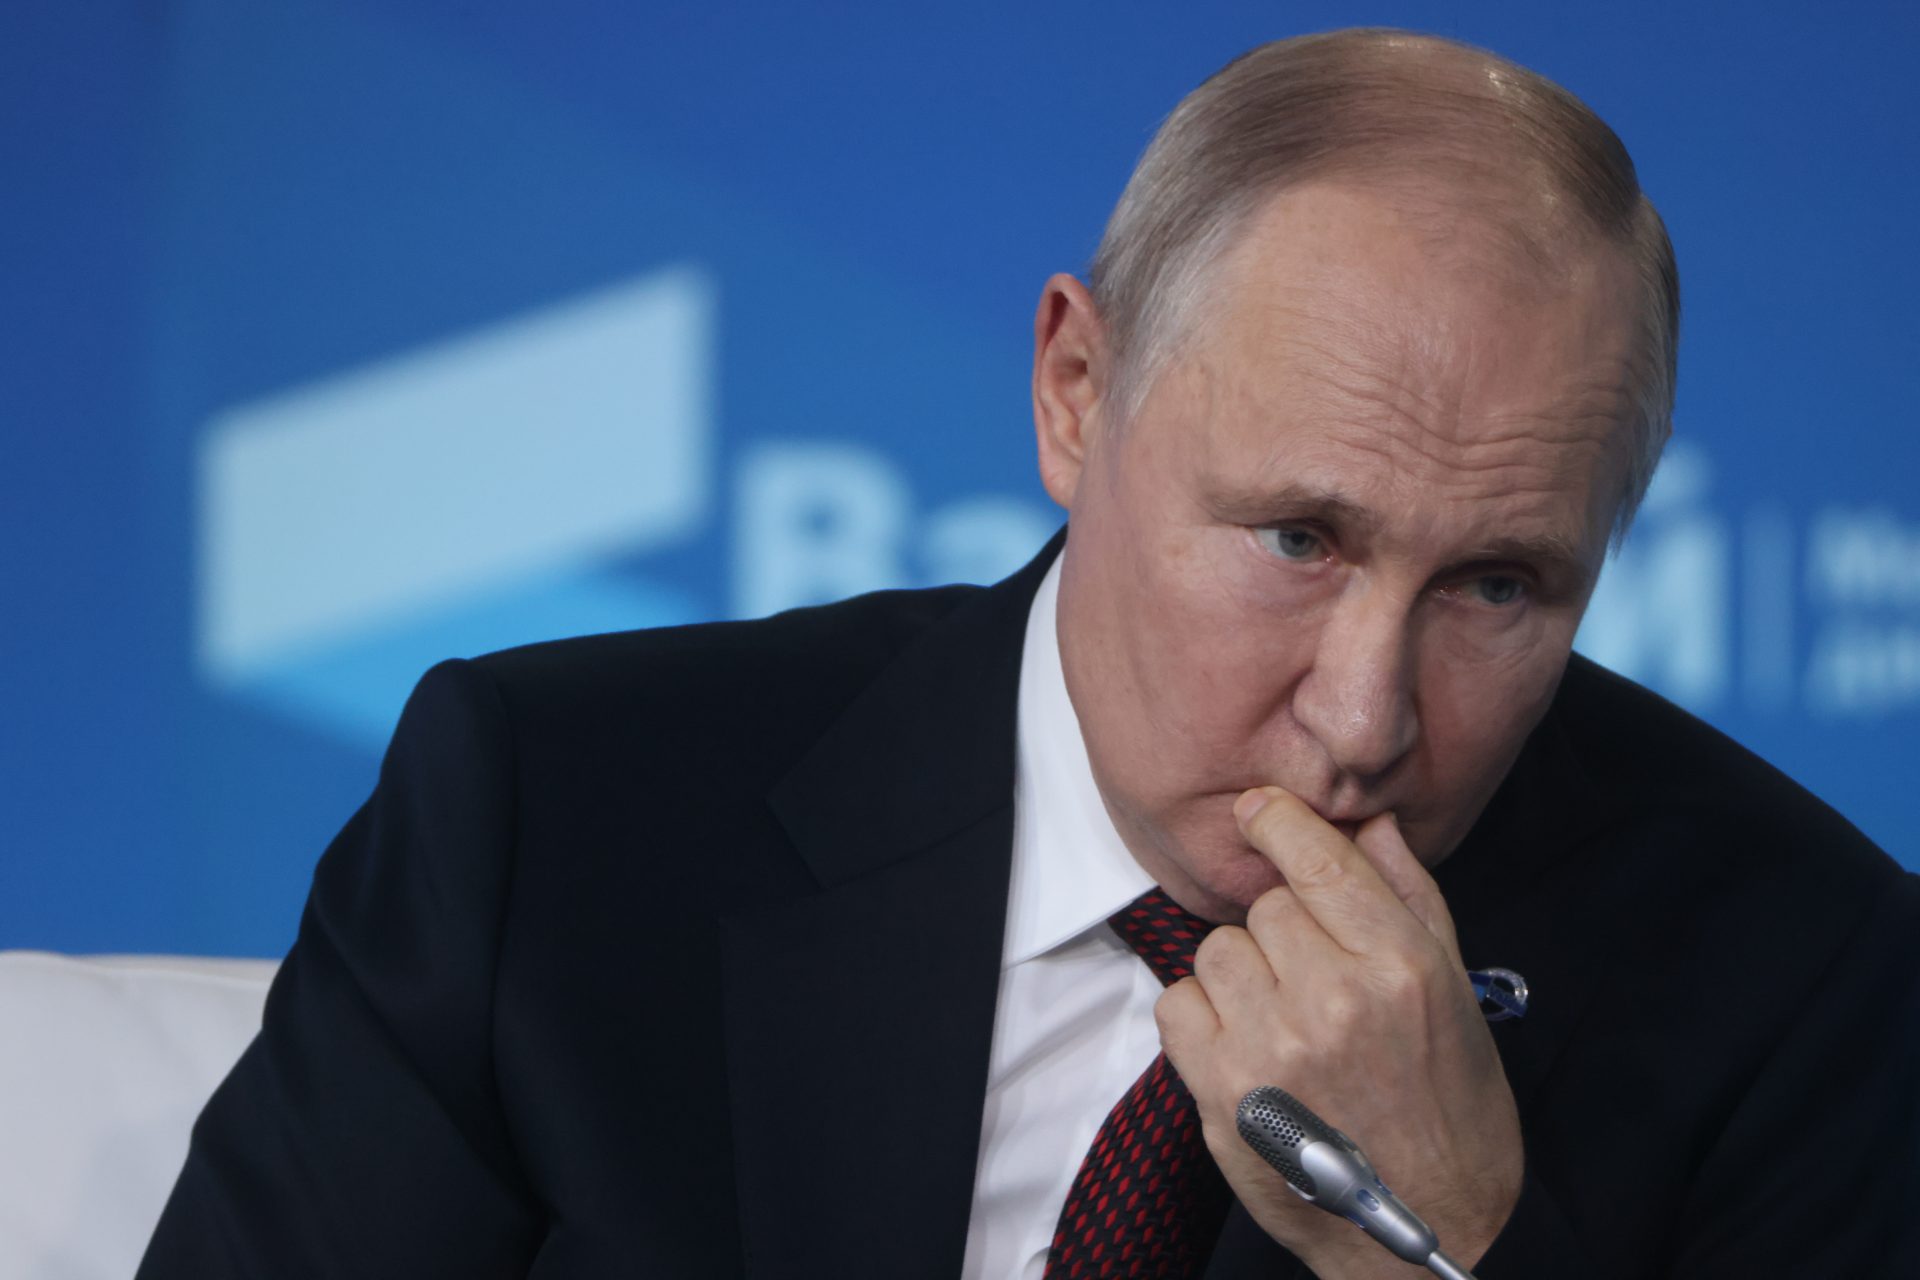 Putin has yet to announce his re-election bid 